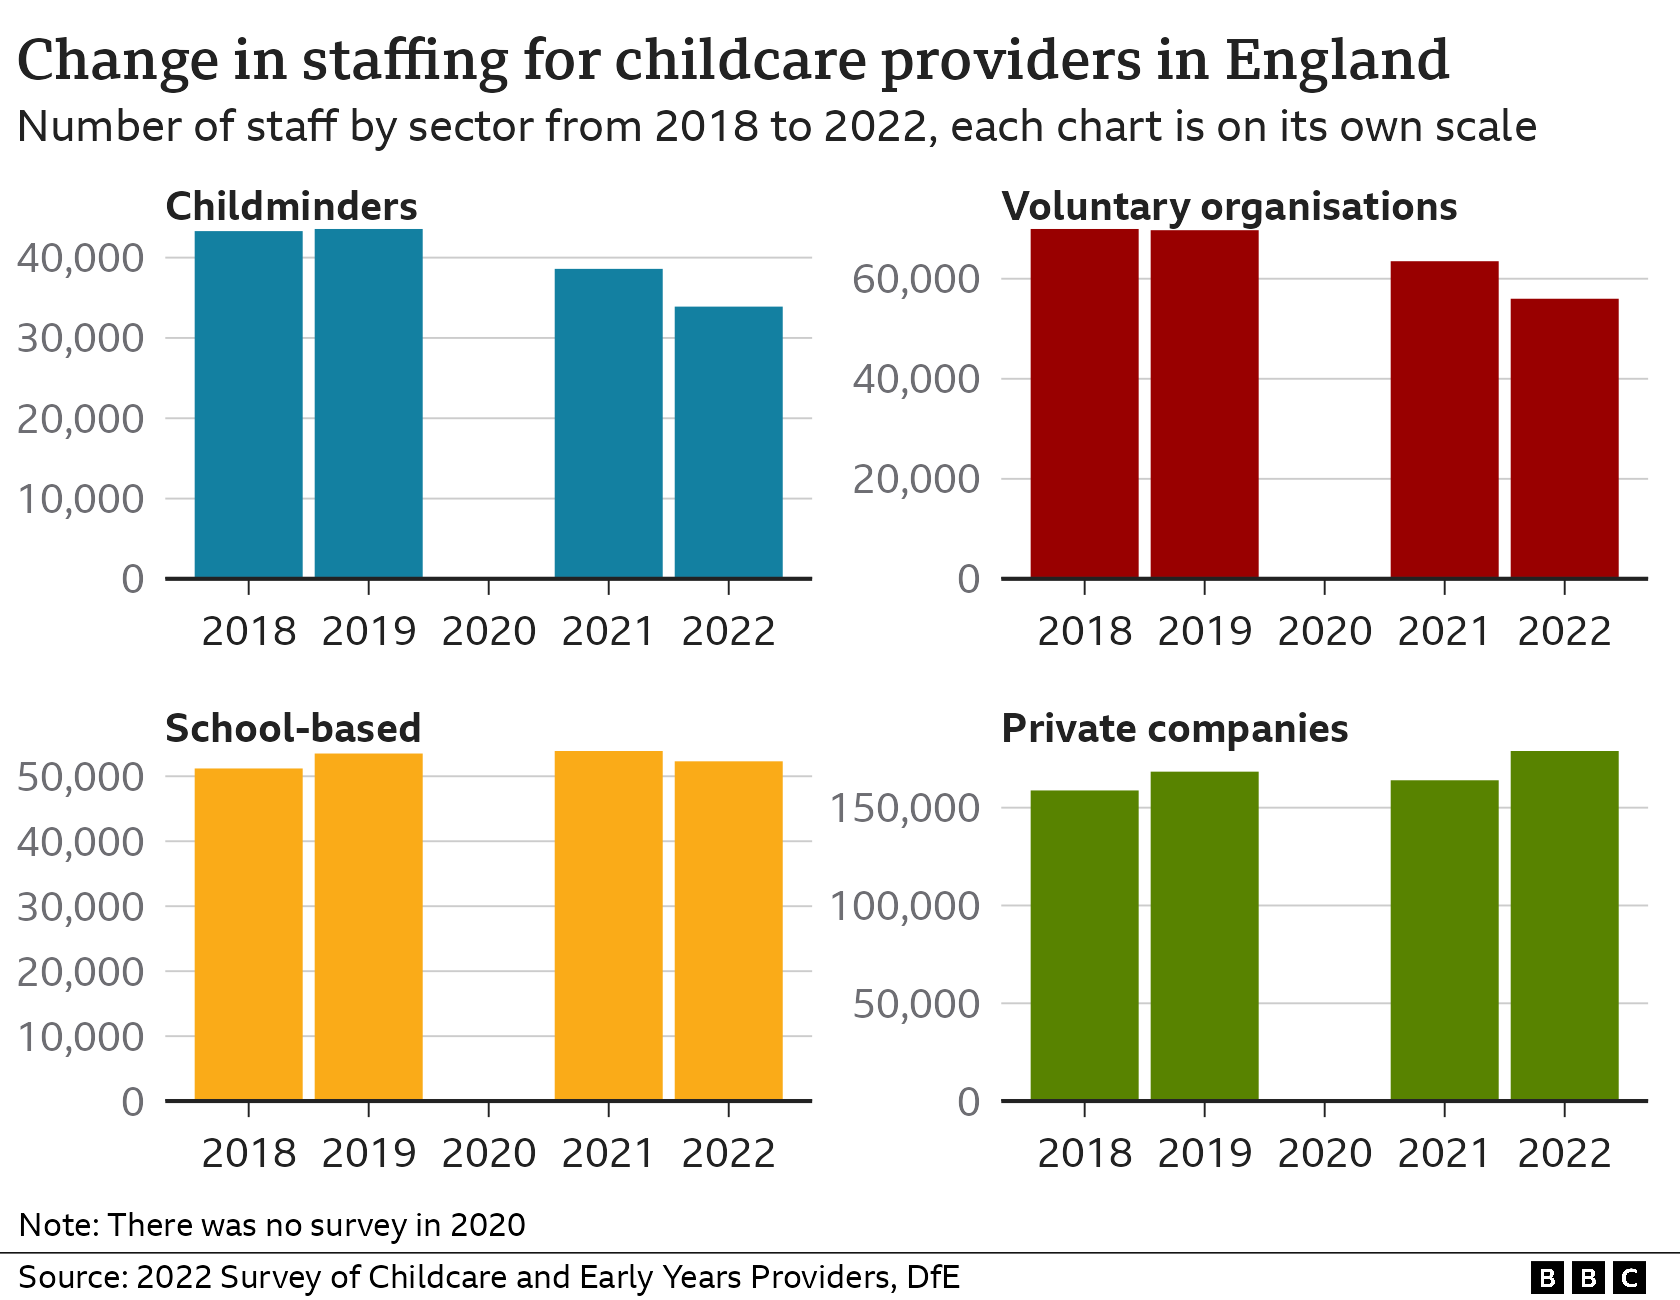 Bar chart showing the change in the number of workers in England, with childminders and voluntary groups down compared with 2019